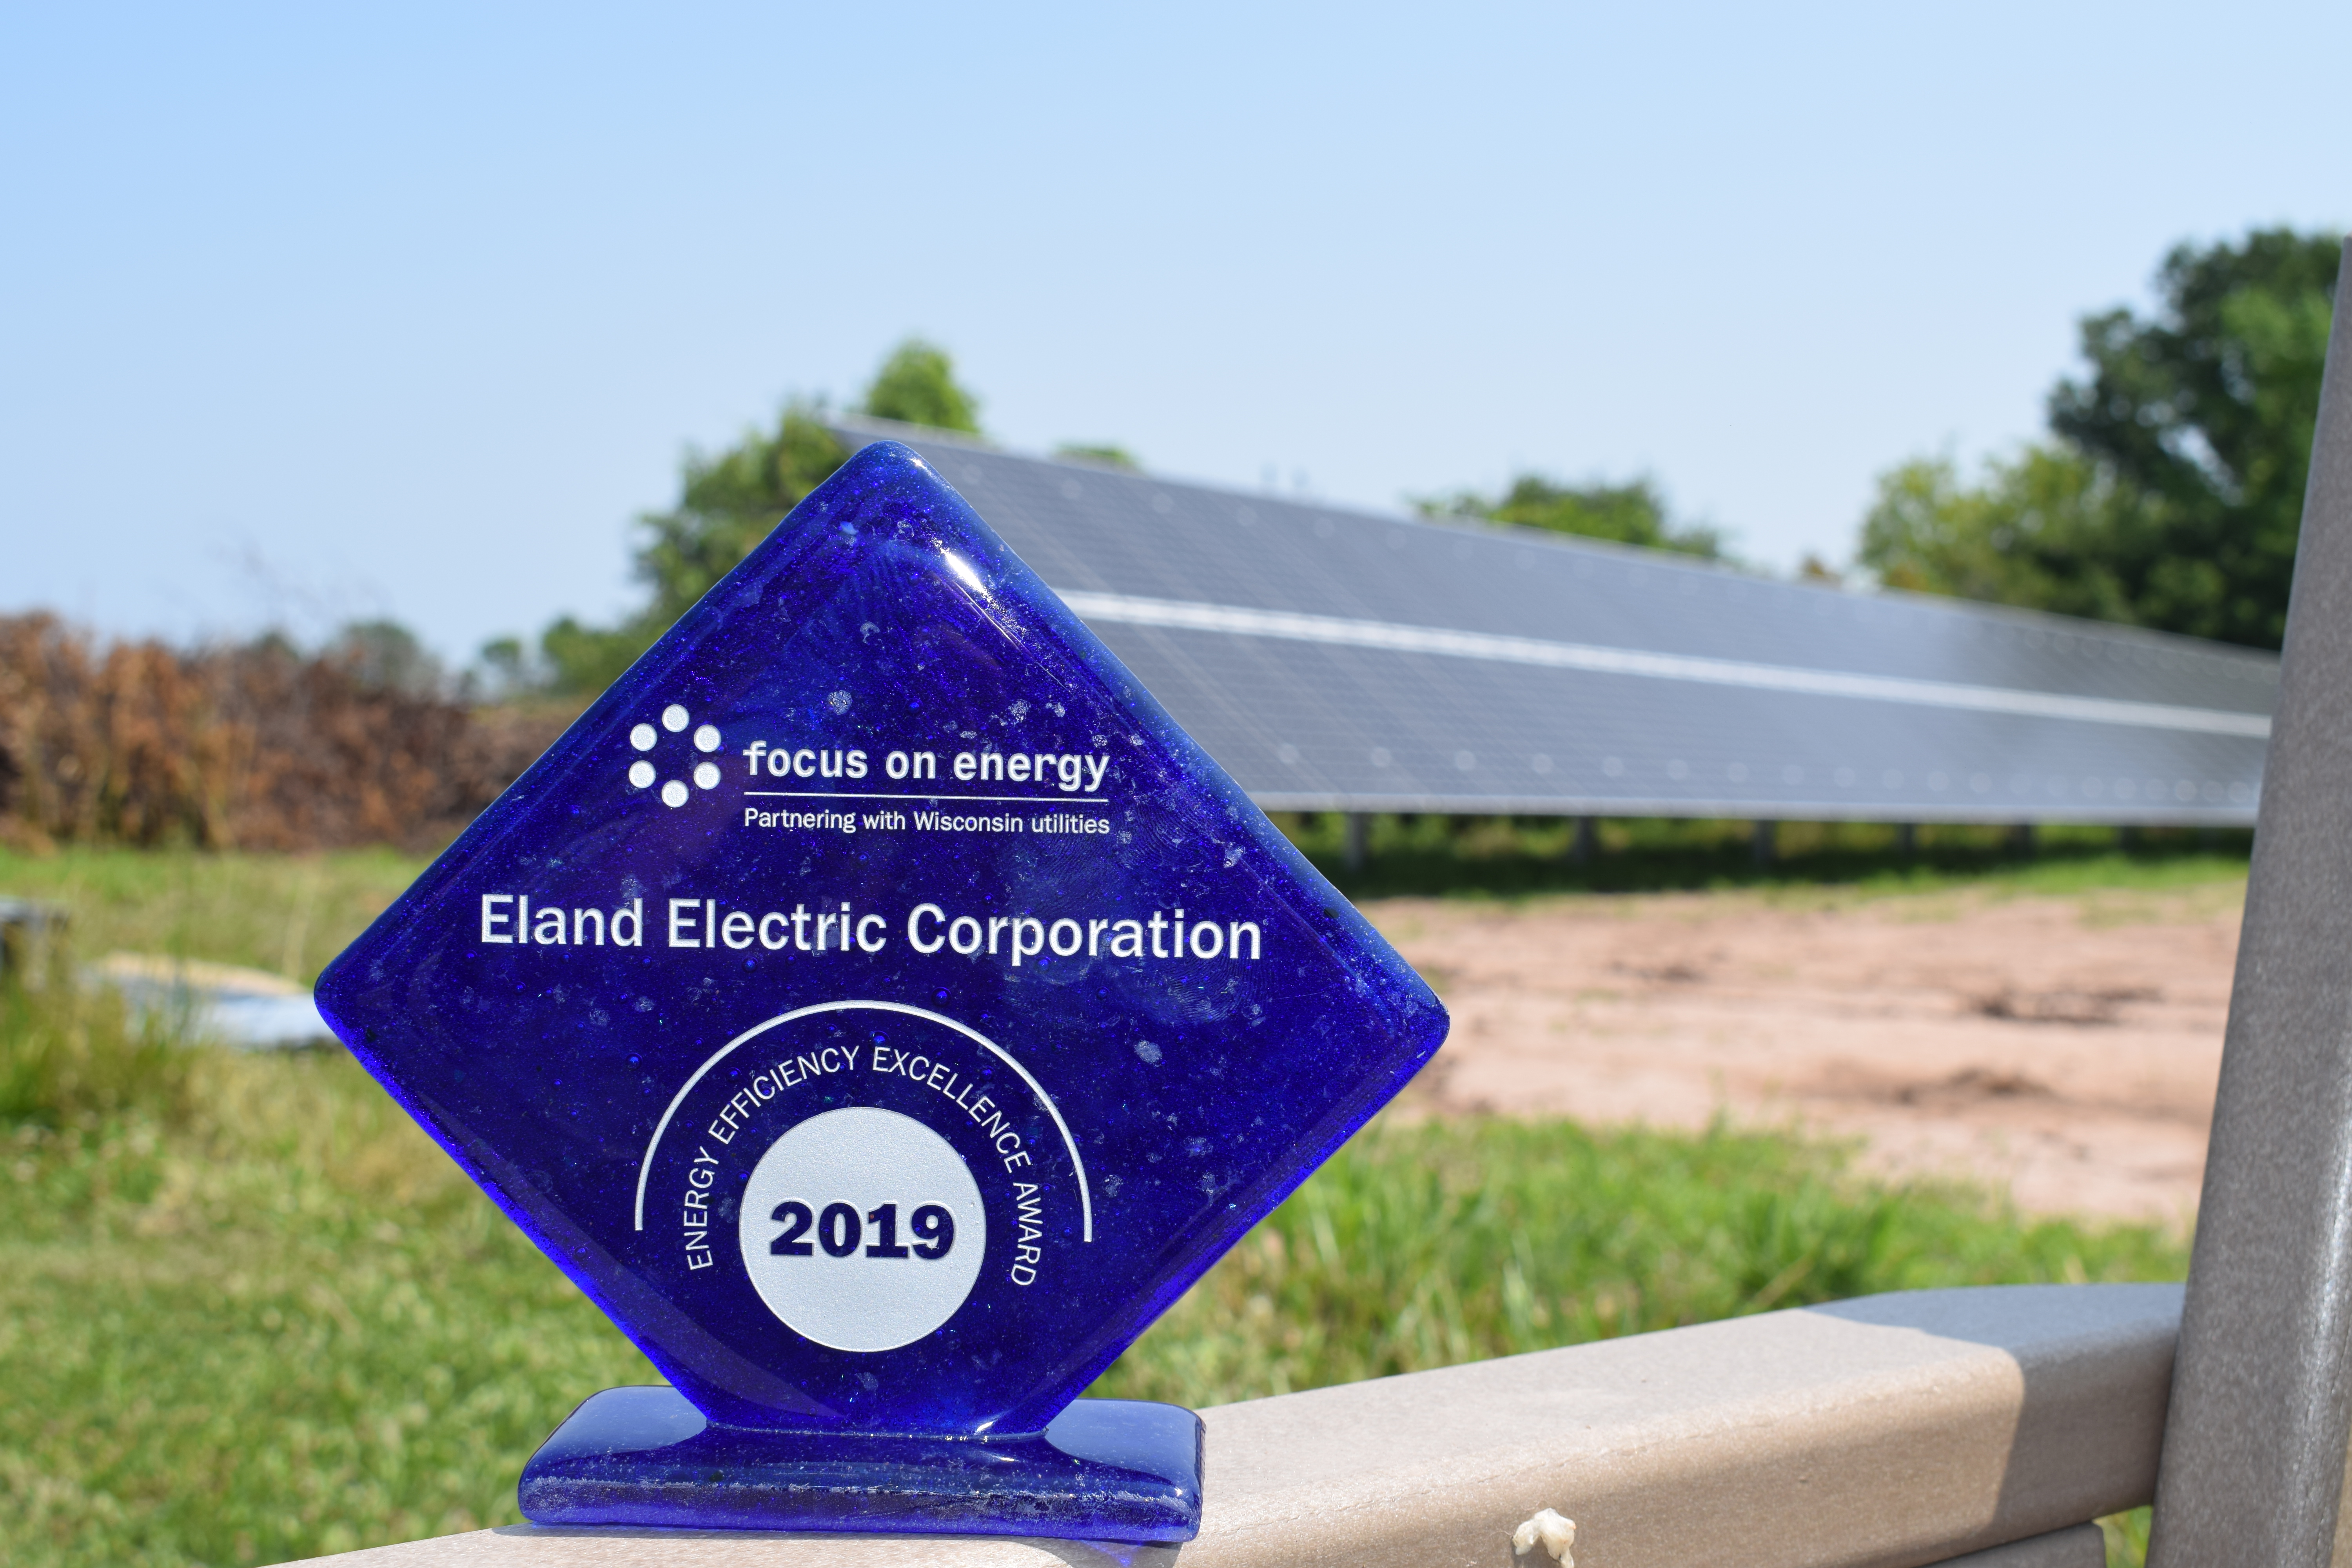 A blue award sits on a ledge. In the background, you can see green space and a solar panel array.